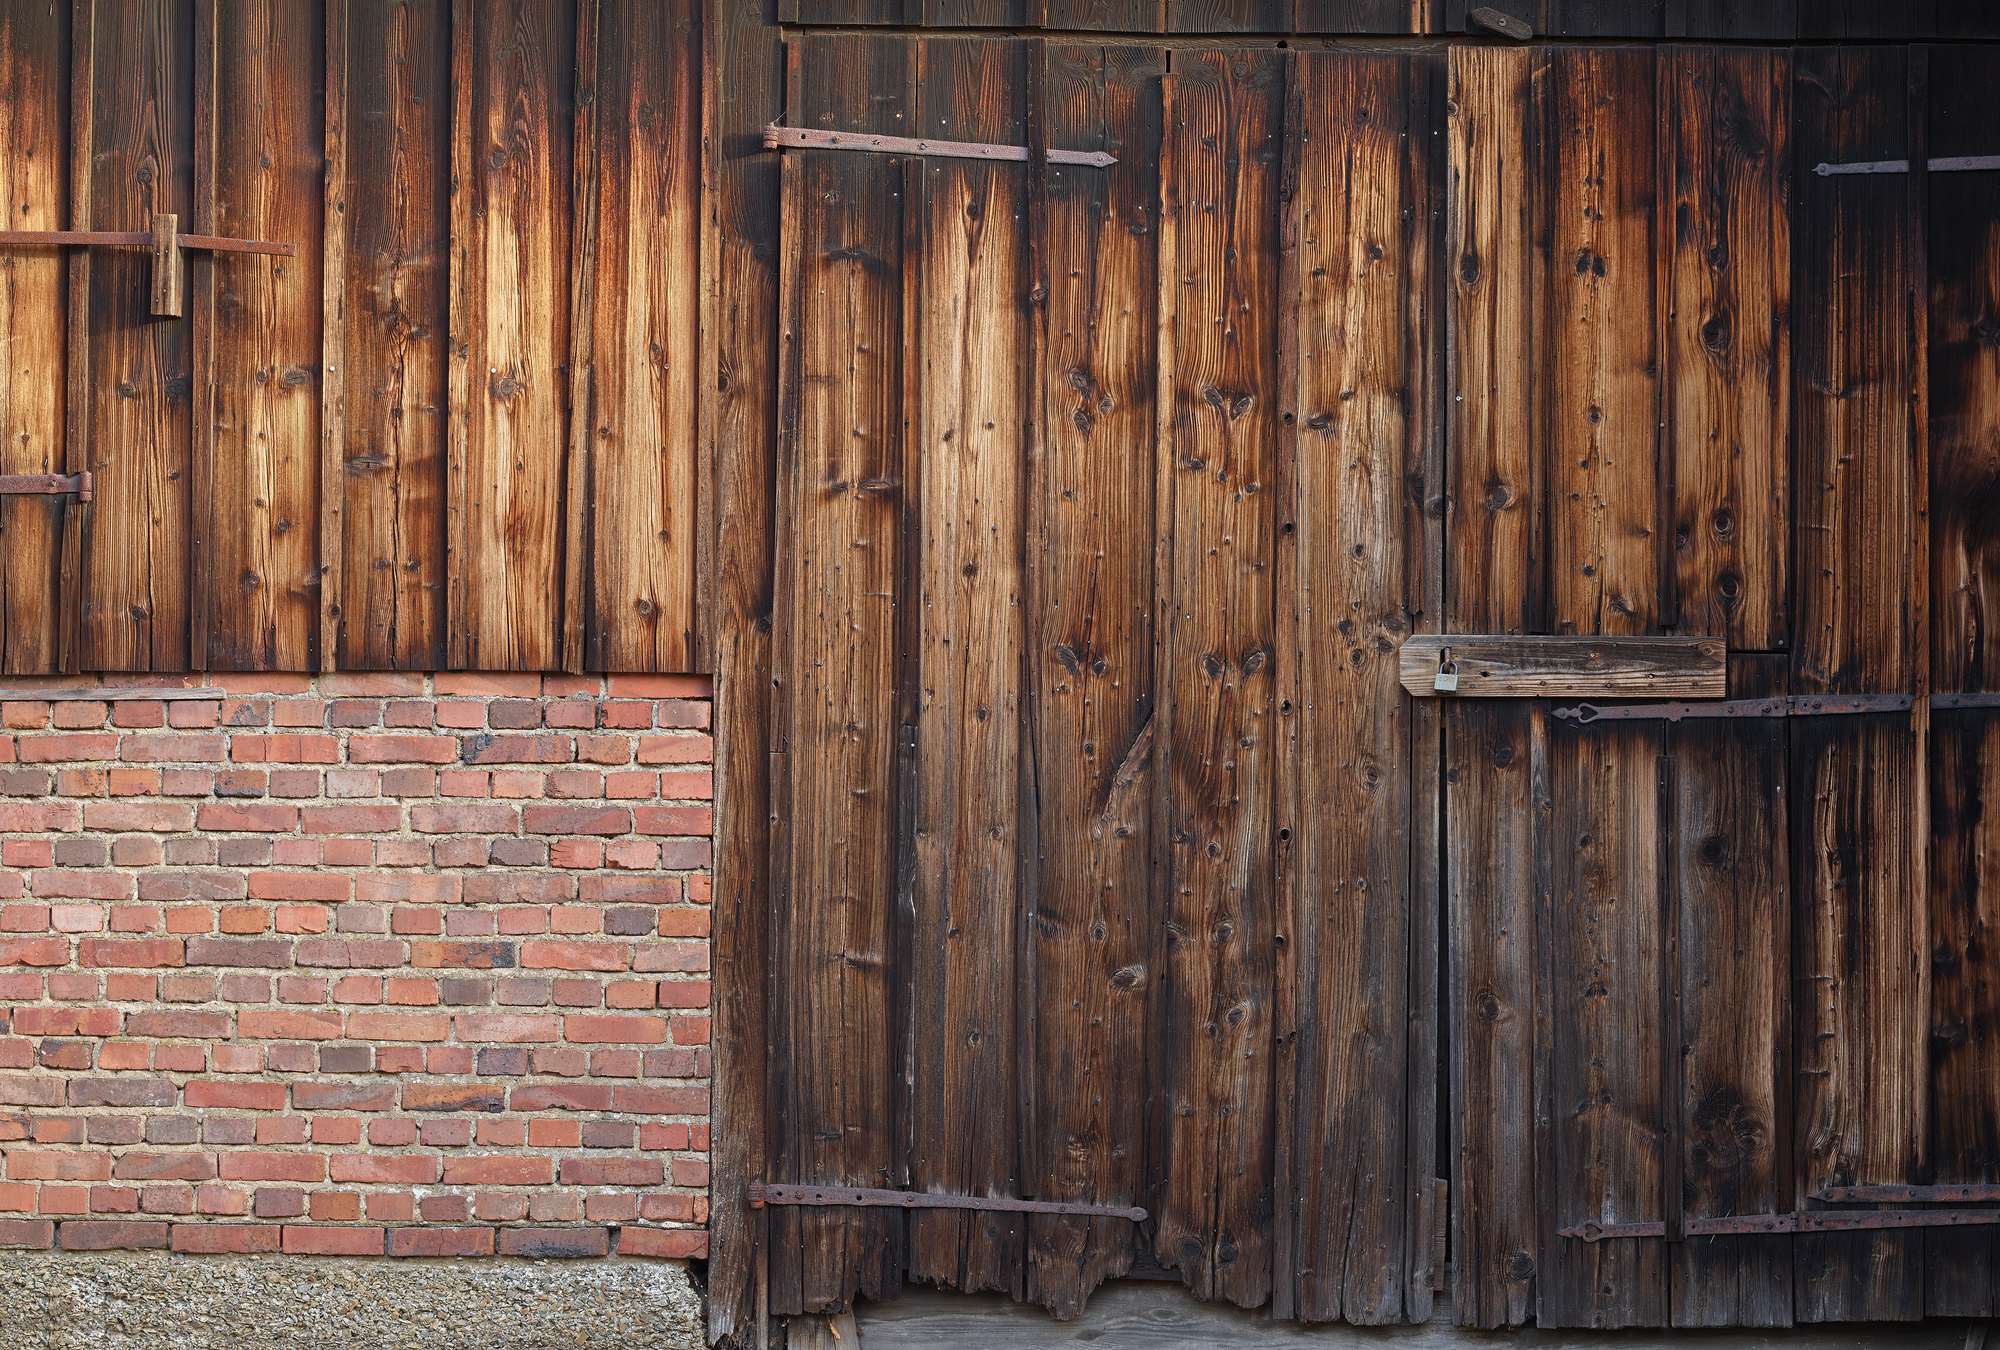             Photo wallpaper red brick wall with wooden planks and barn door
        